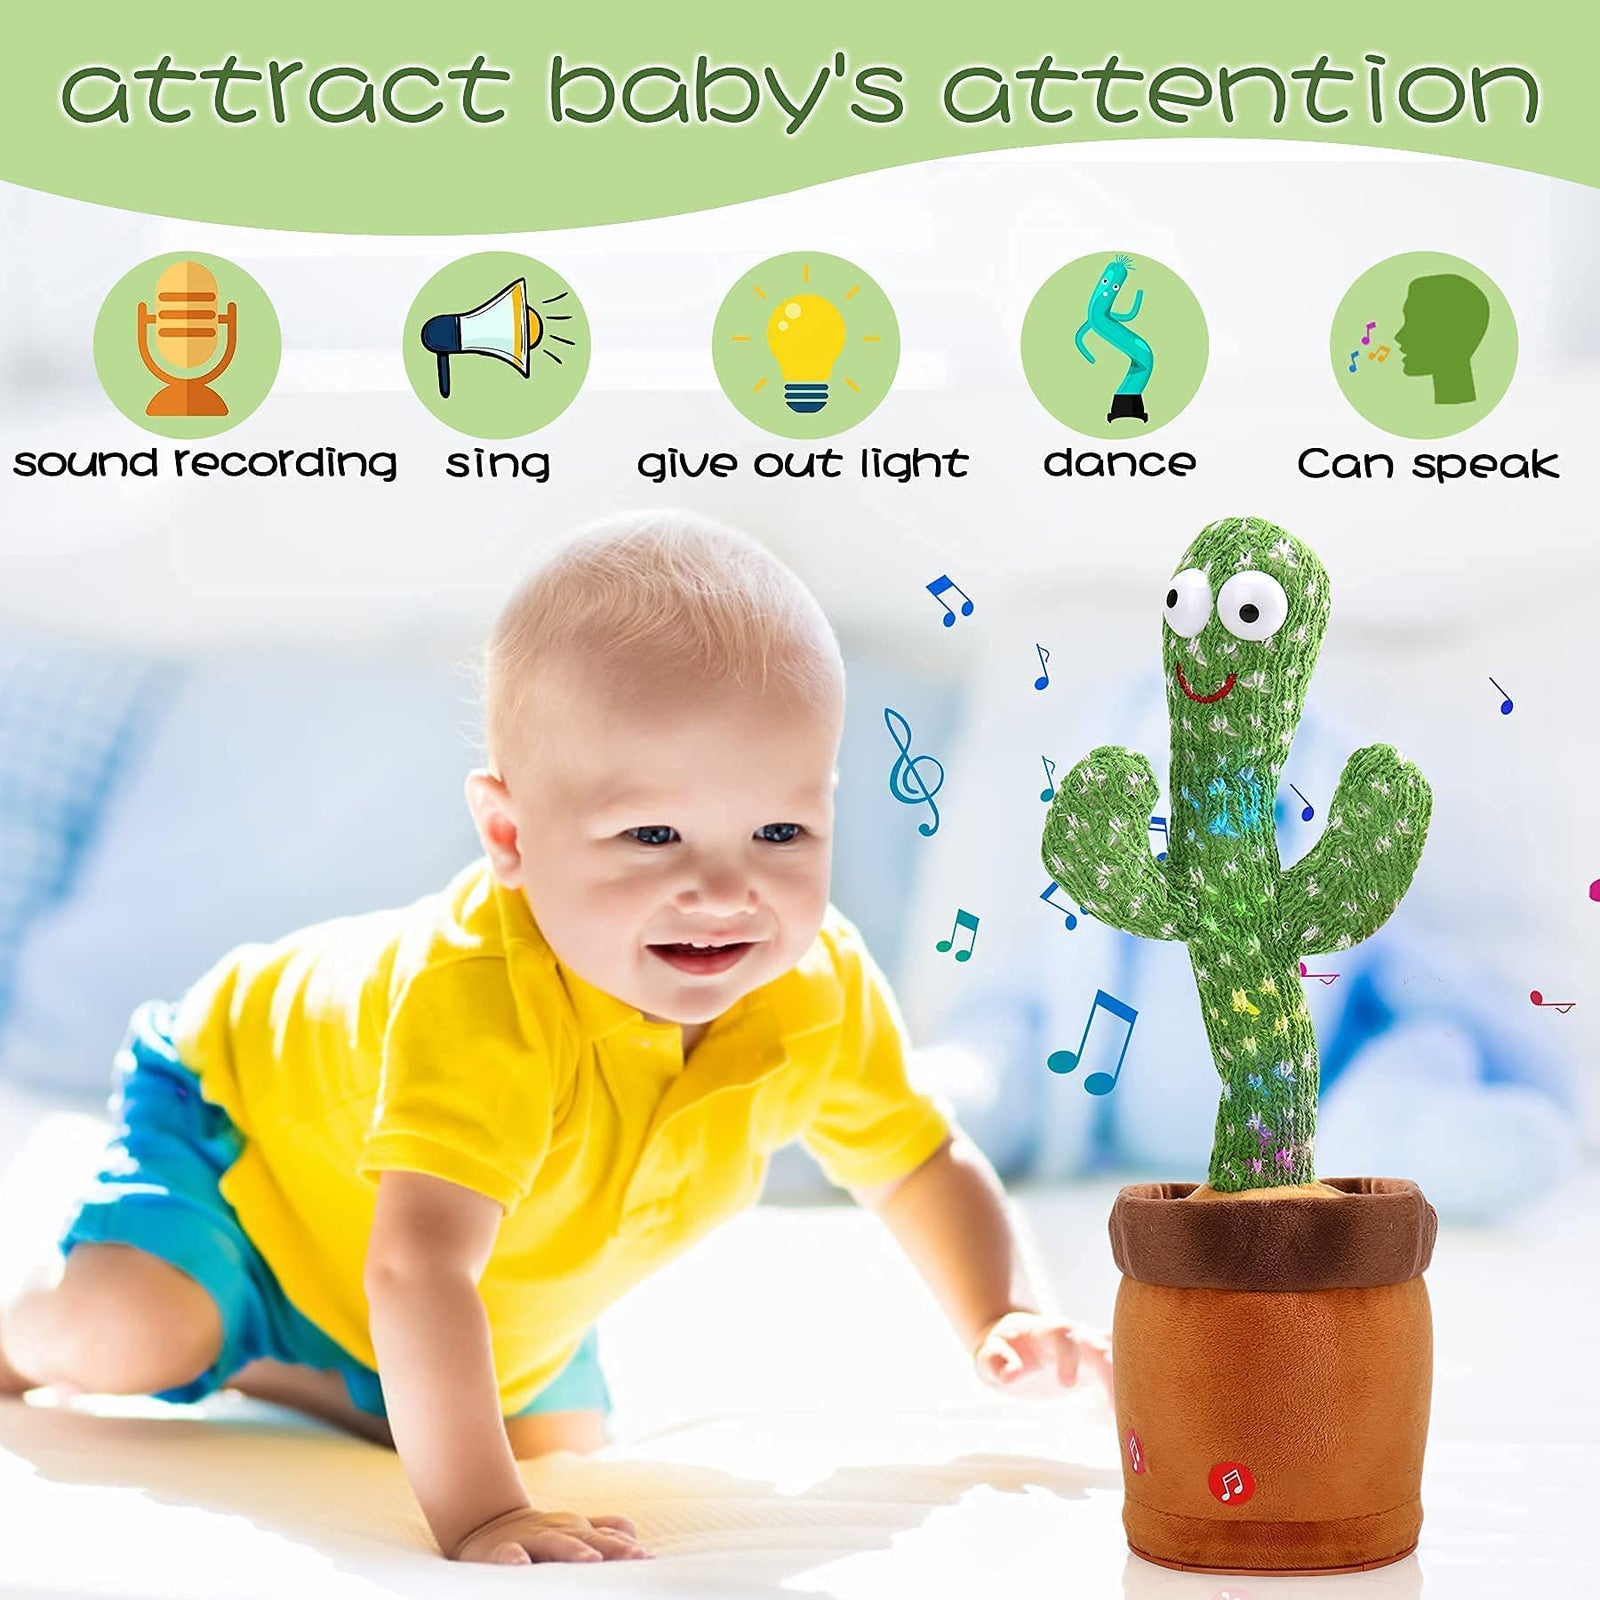 MIAODAM Dancing Cactus Talking Toy, Wriggle Singing Cactus Repeats What You Say, Soft Plush Talking Toy Electric Speaking Cactus Baby Toys Funny Creative Kids Toy